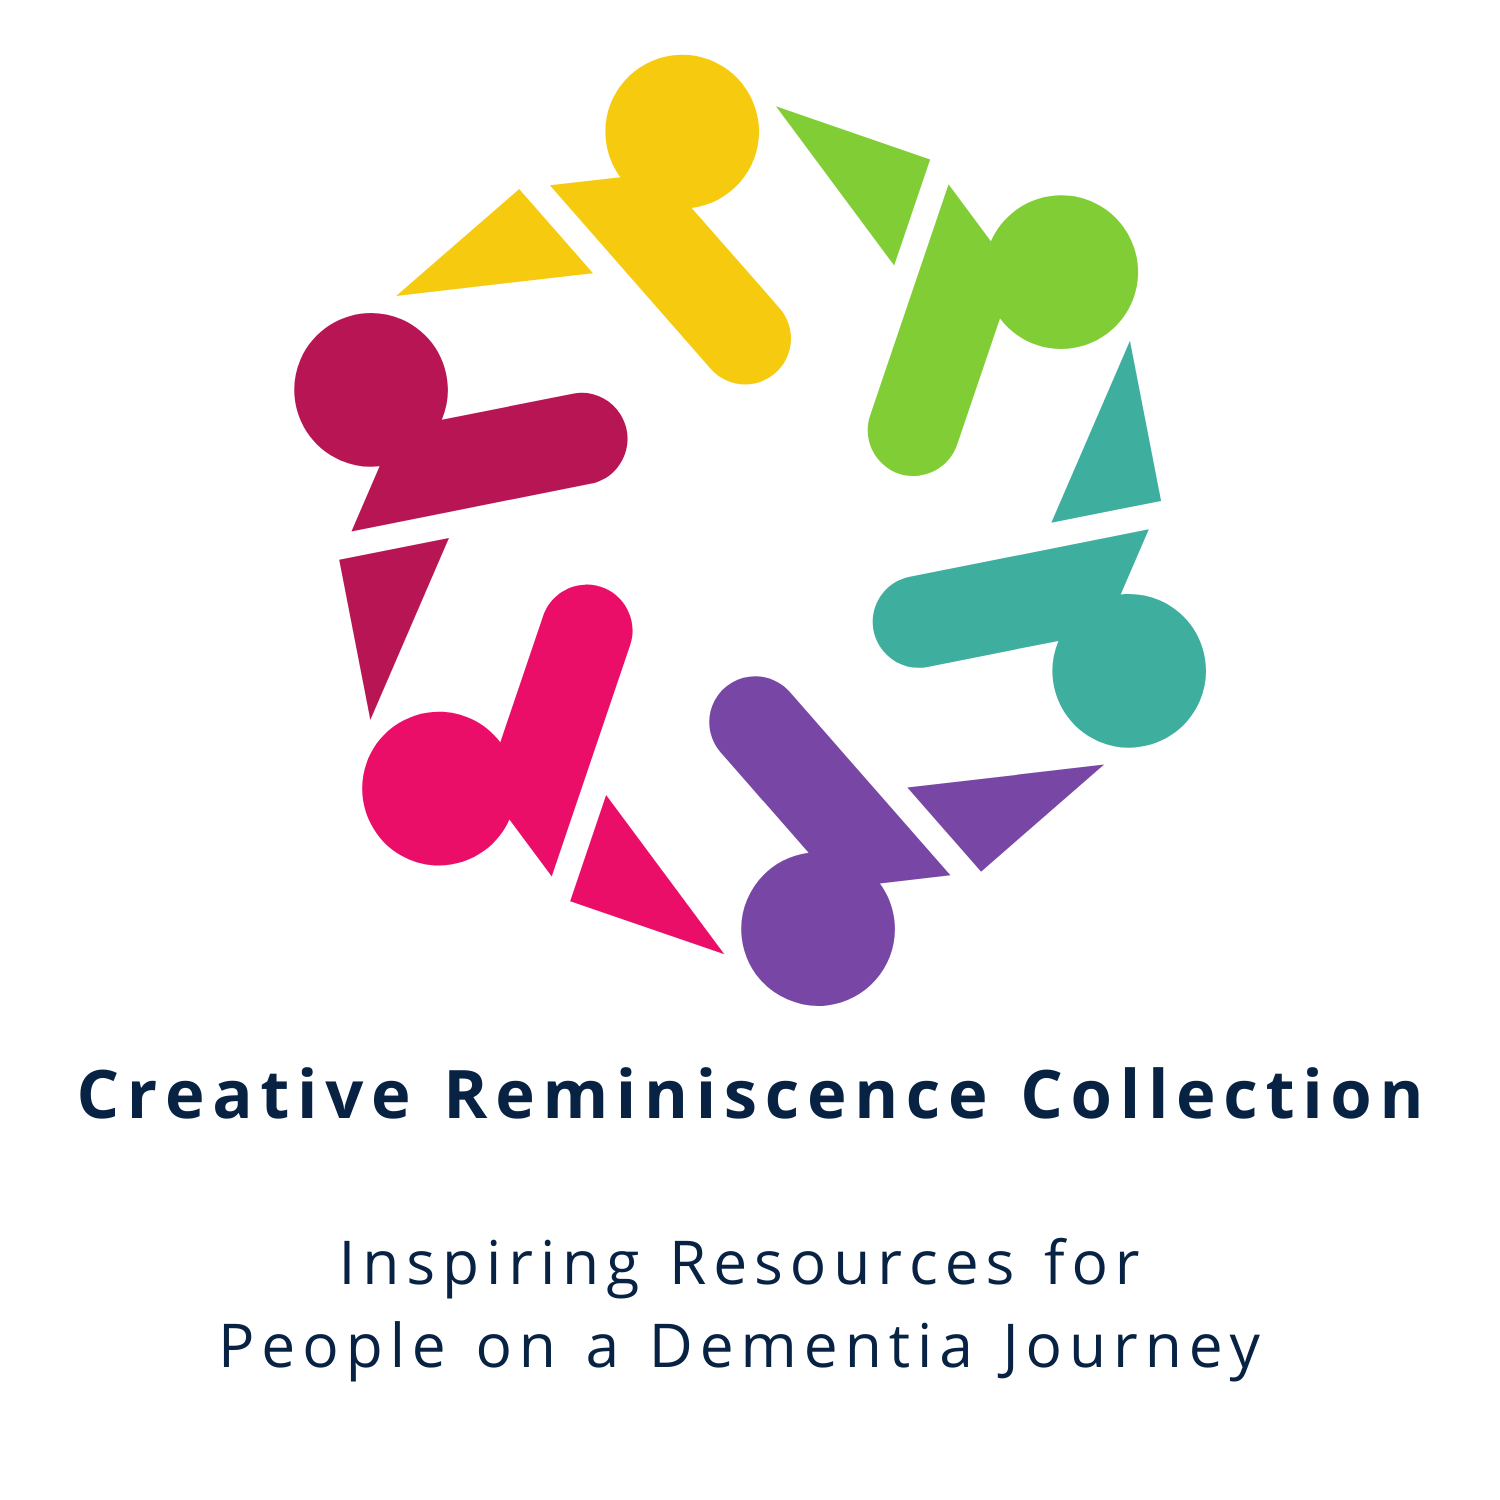 Creative Reminiscence Collection